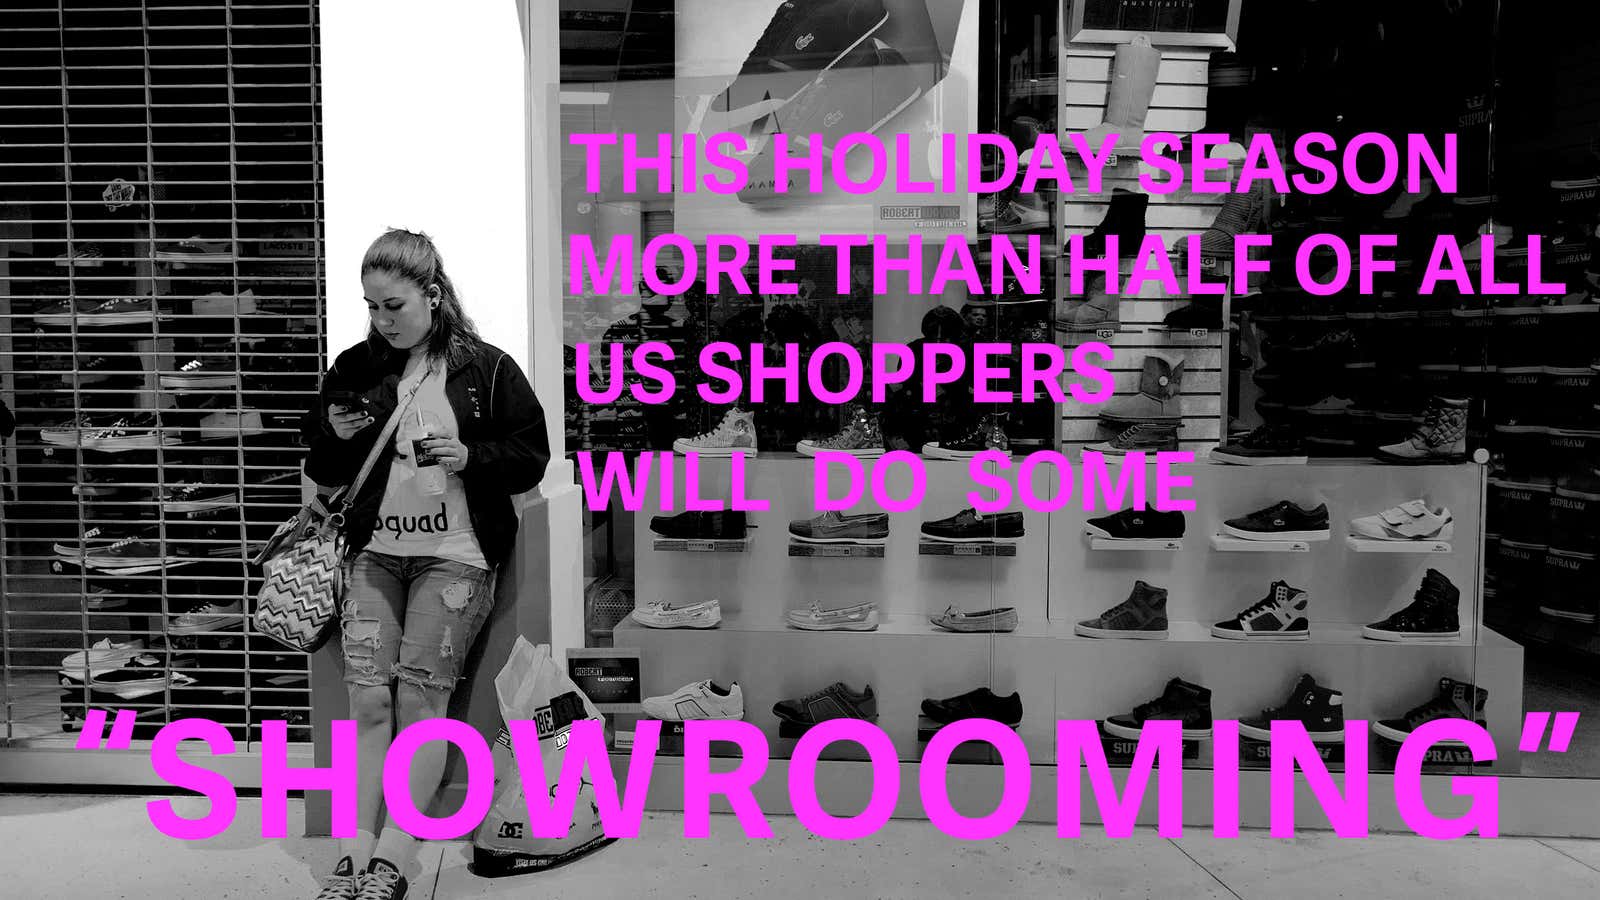 Retailers show support for “showrooming”